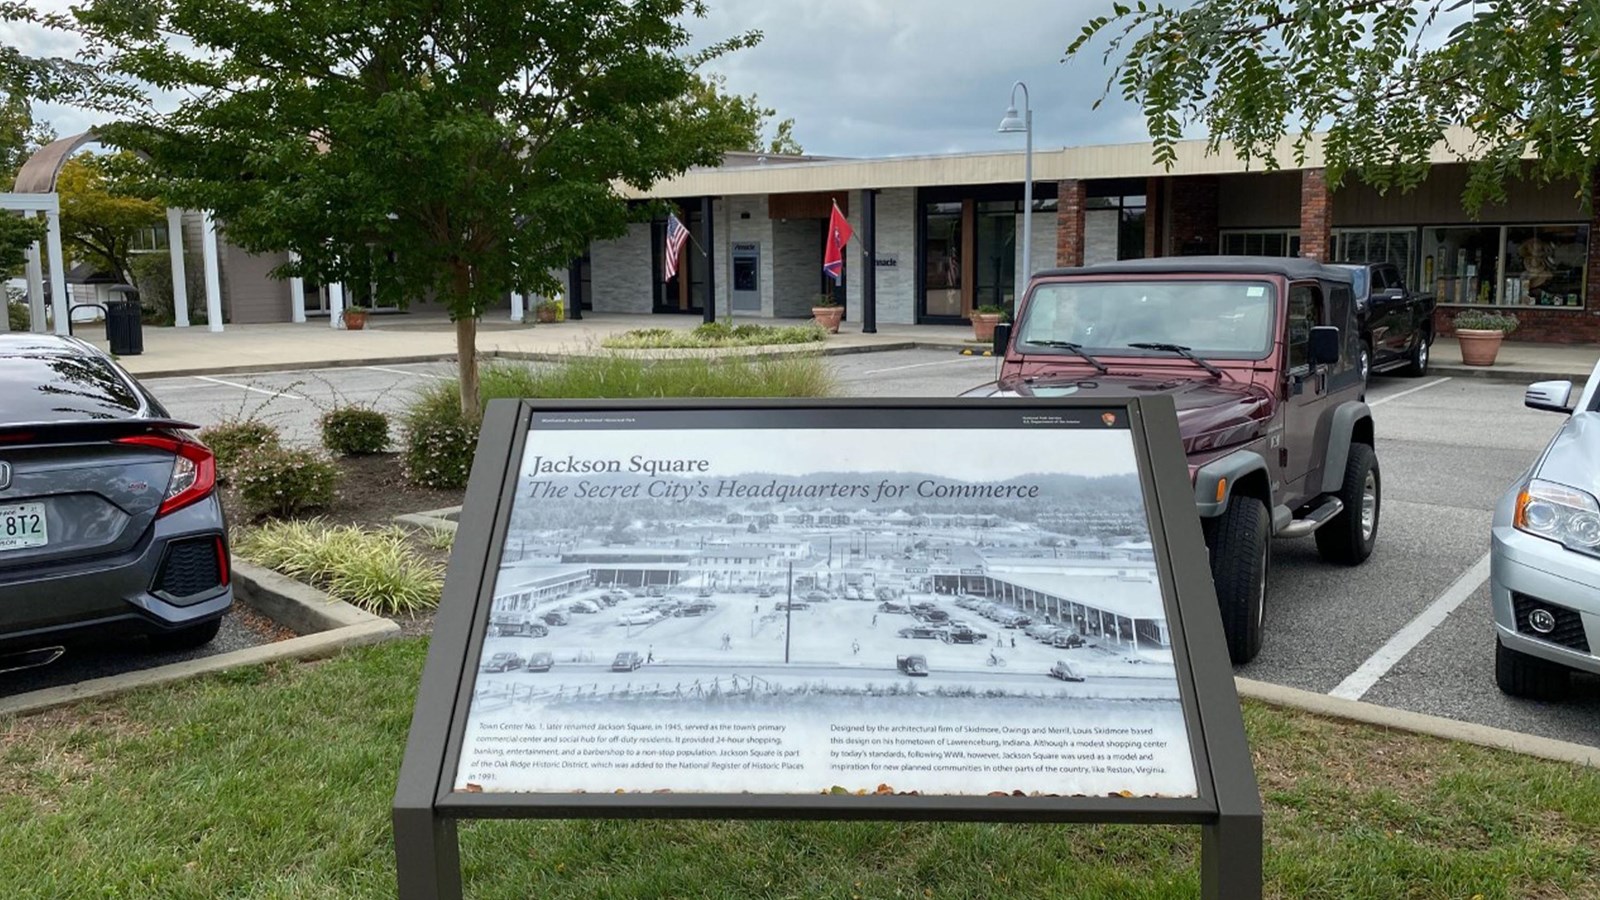 A strip mall with cars parked and historical marker in foreground